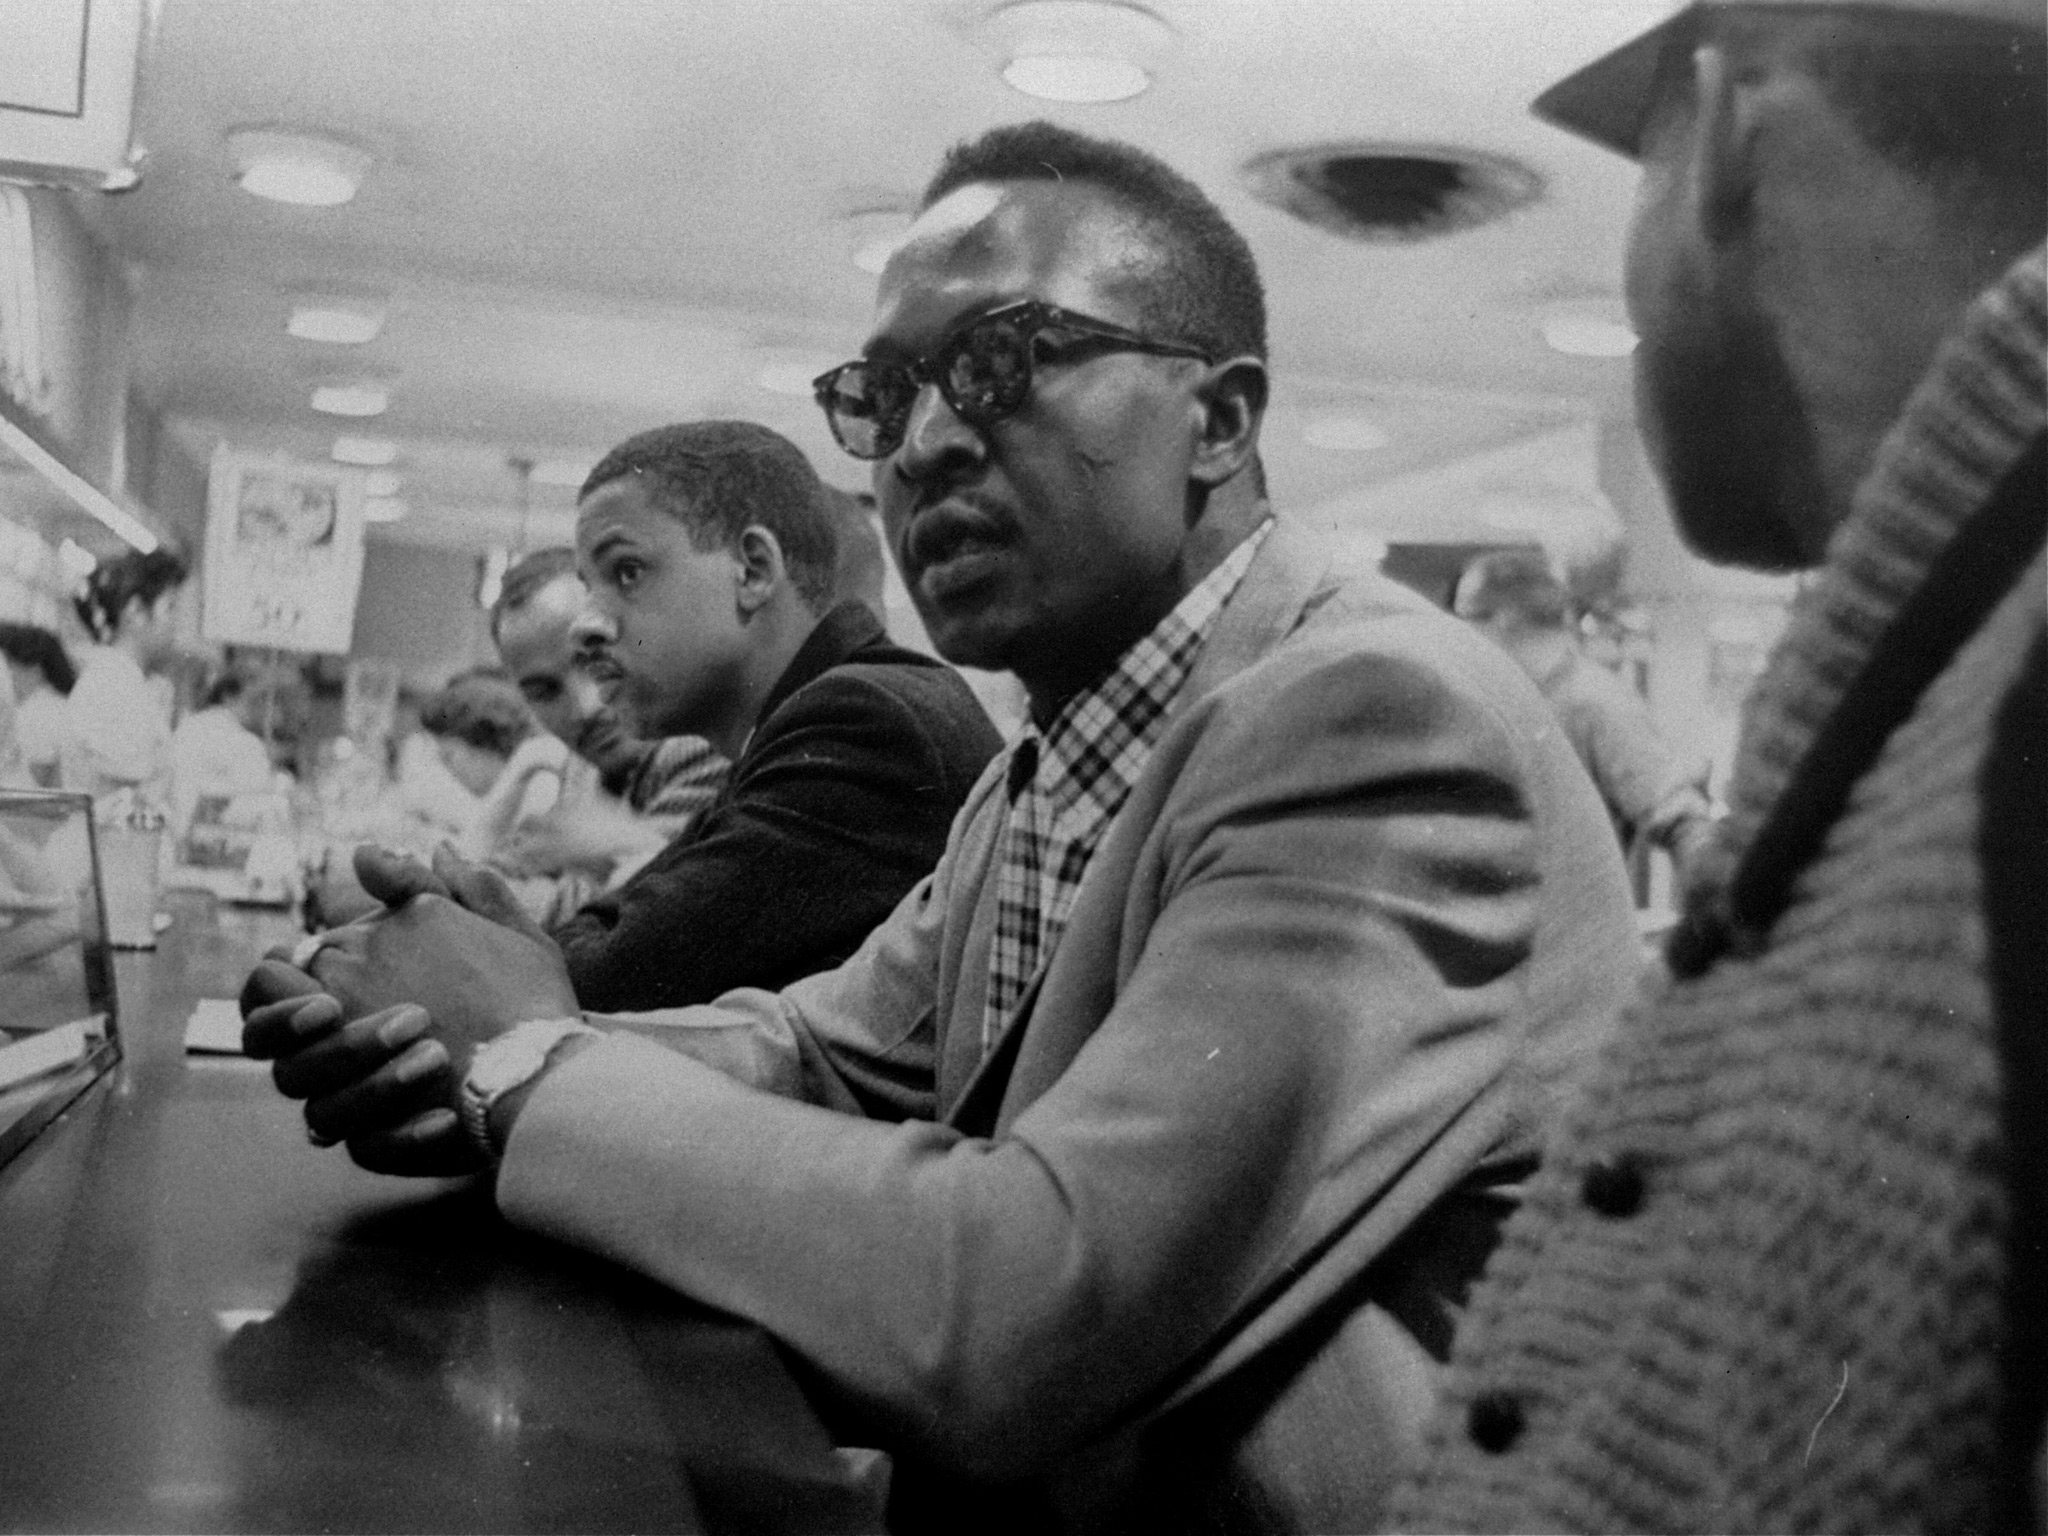 Greensboro lunch counter sit-in - picture of the day | Art and design | The Guardian